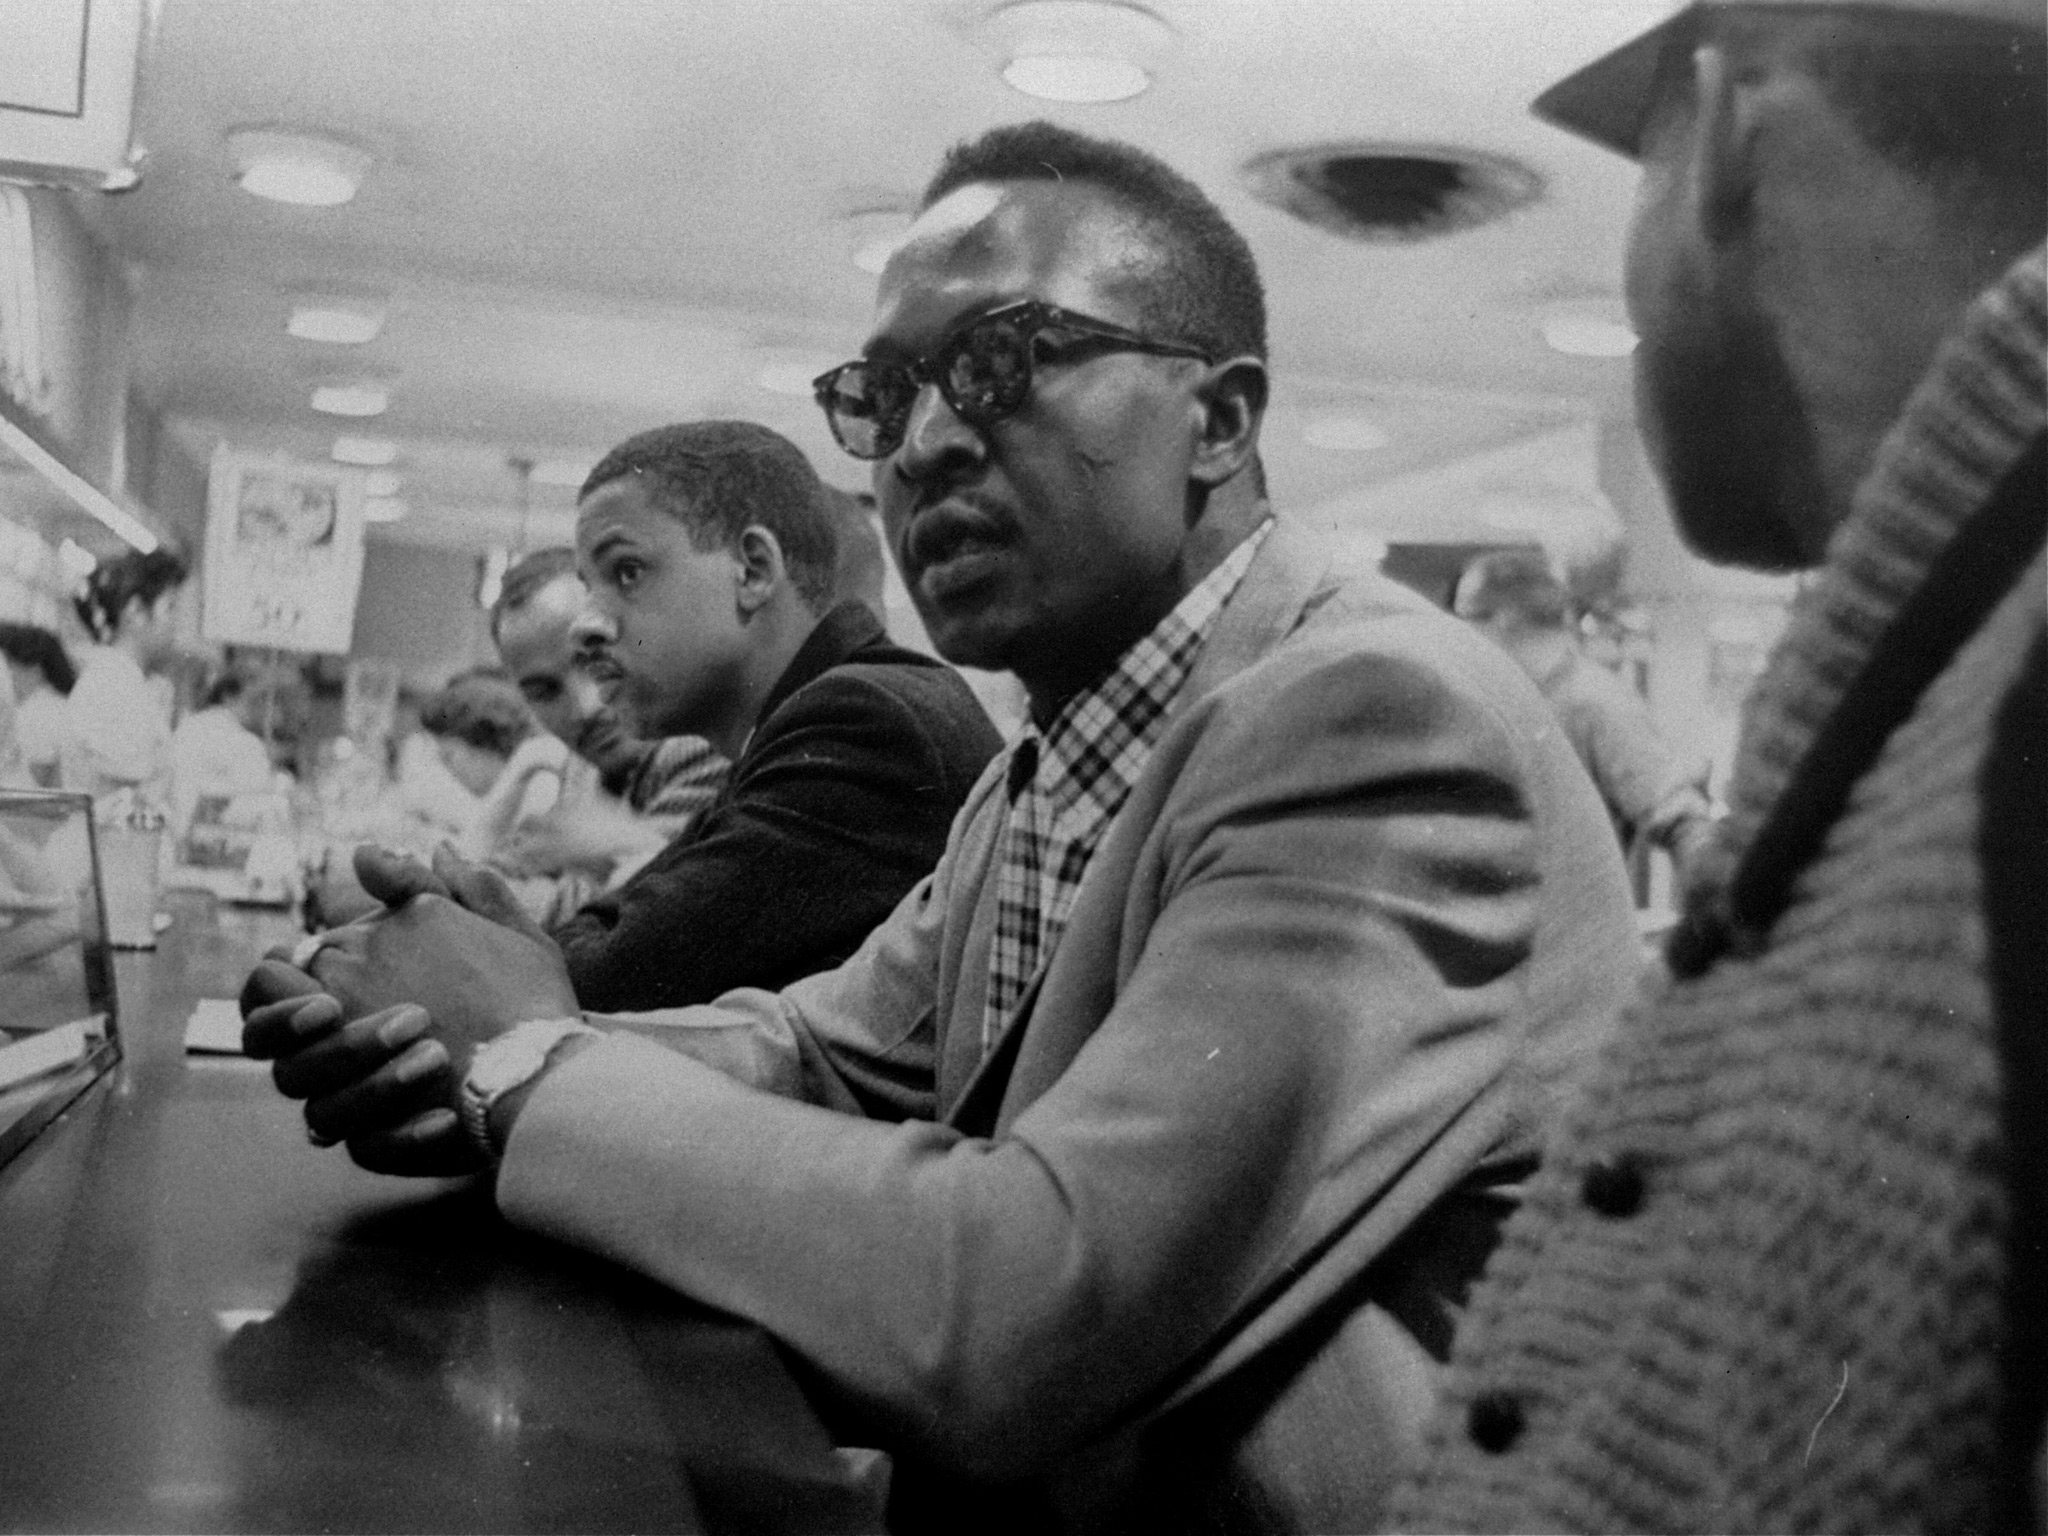 Greensboro lunch counter sit-in - picture of the day | Art and design | The Guardian